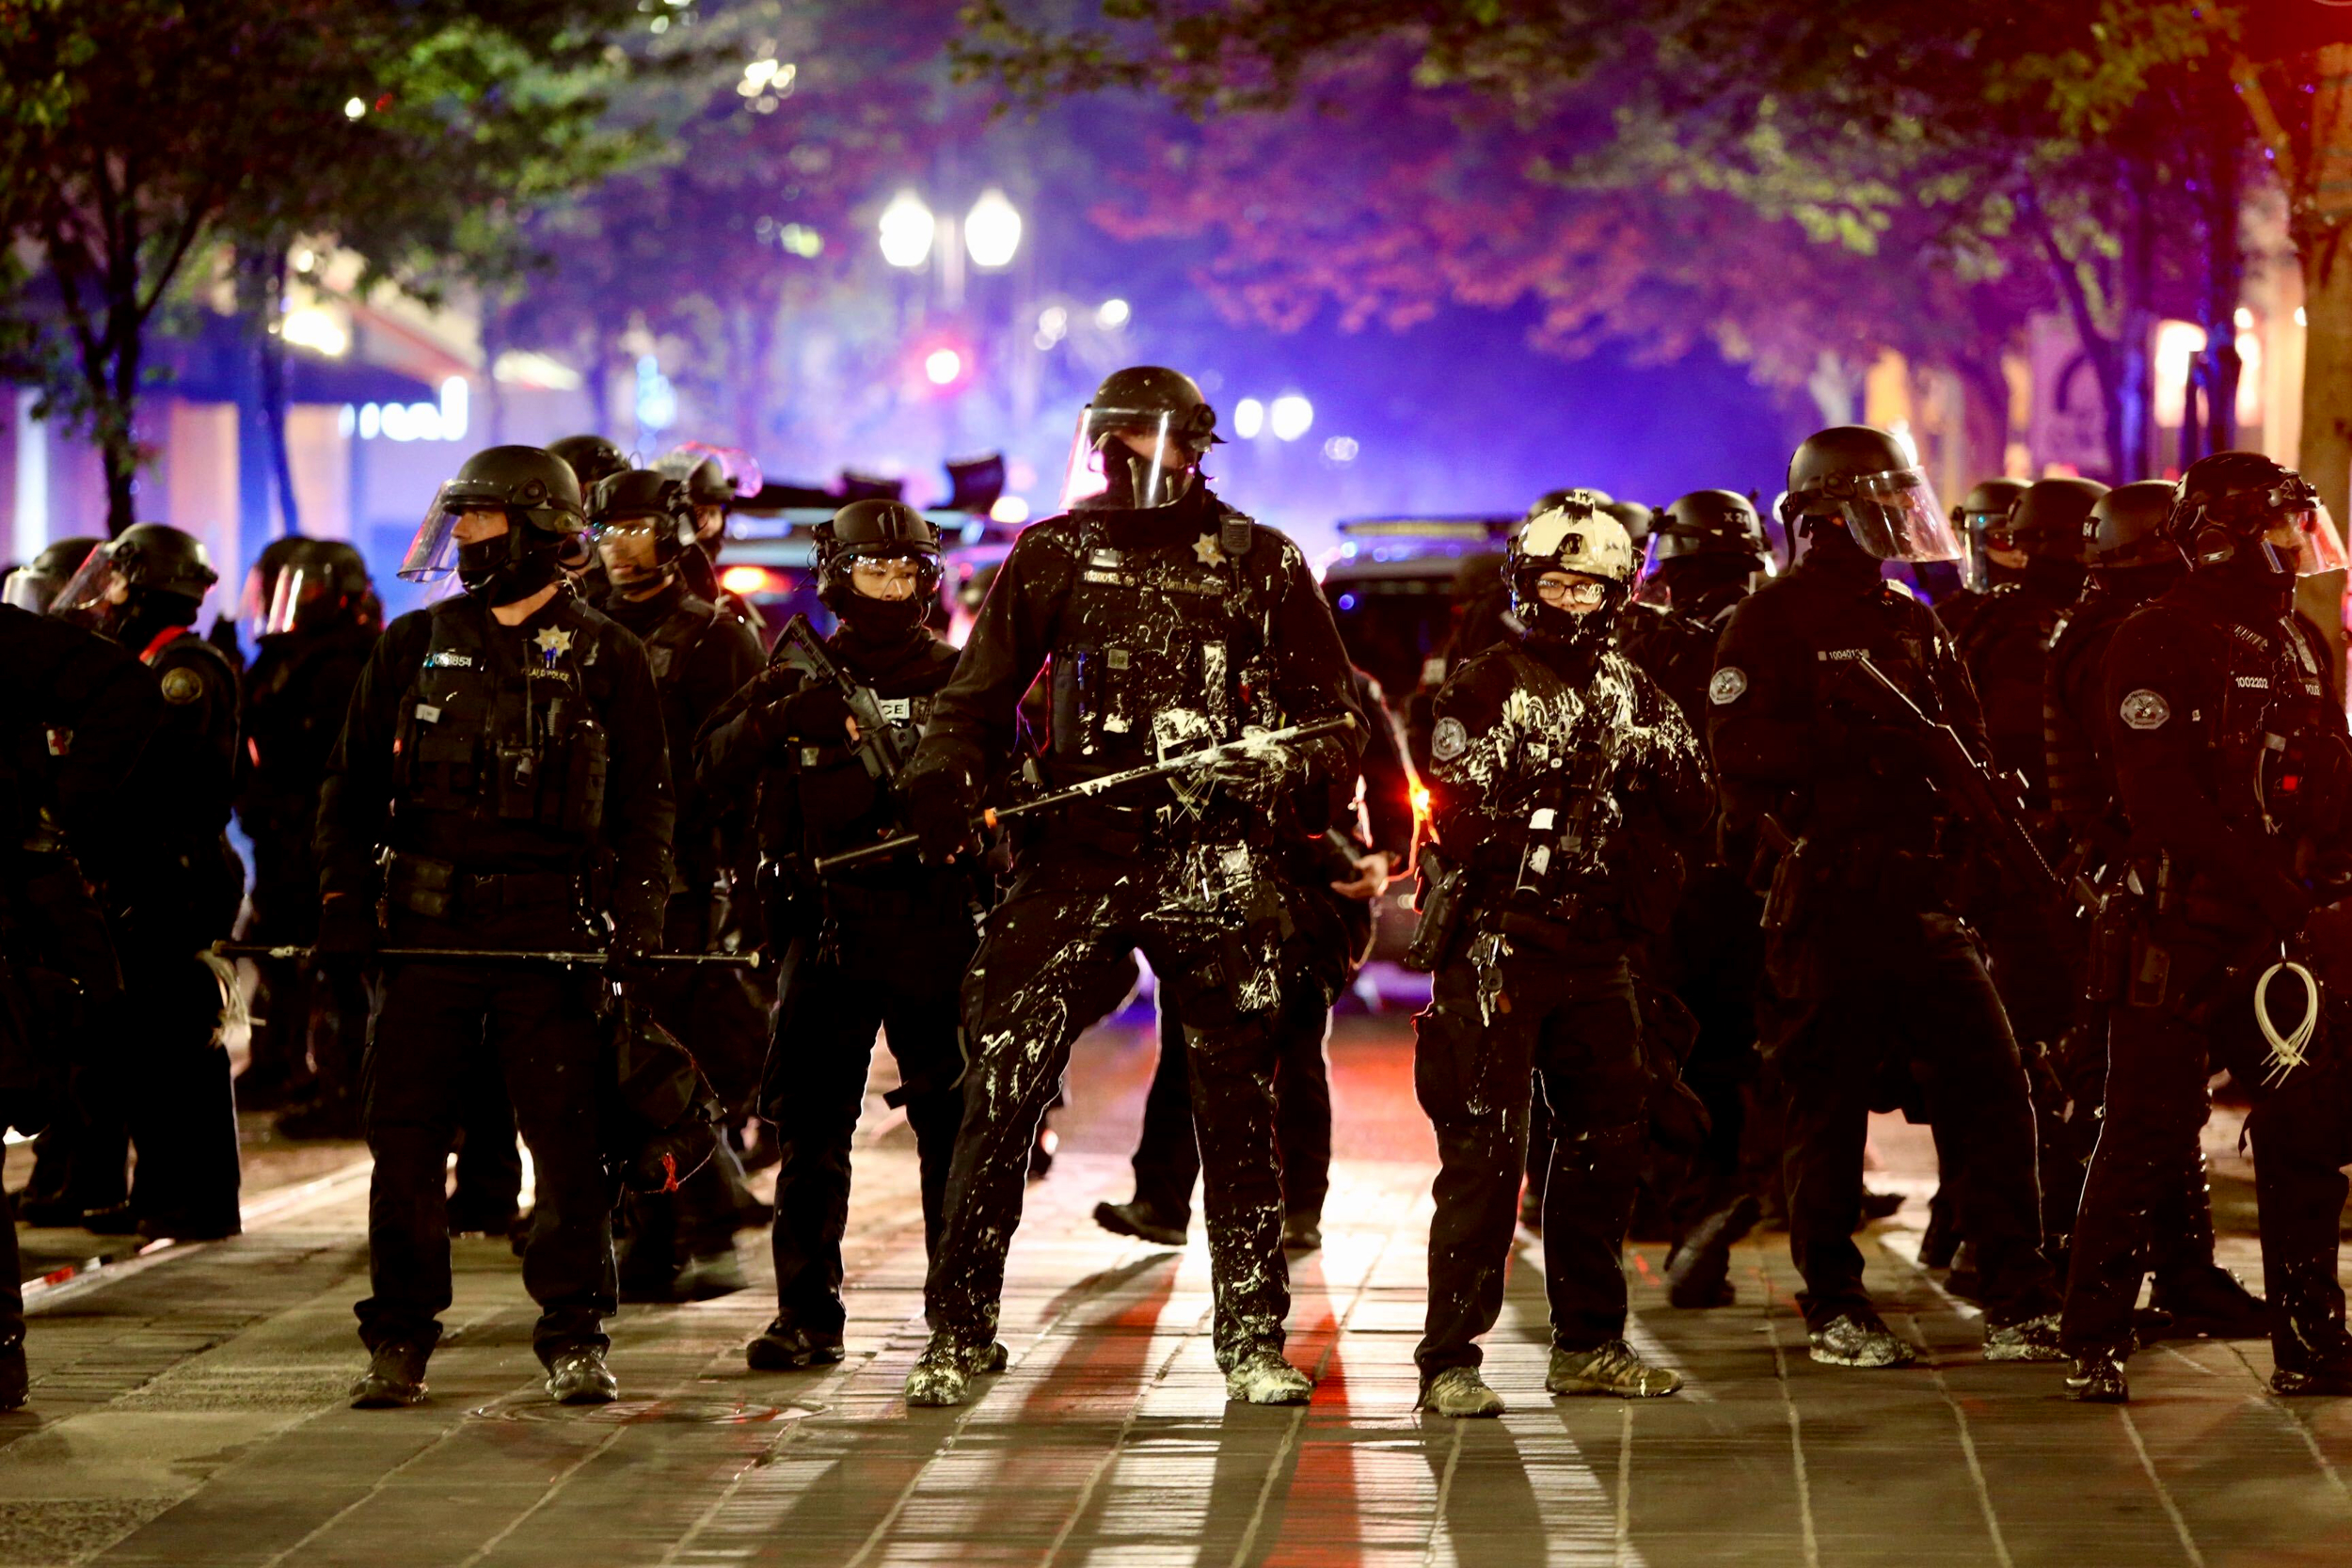 The Portland Police declared the gathering in downtown Portland on Aug. 13, 2020 a riot and pushed the protesters away from the Justice Center.